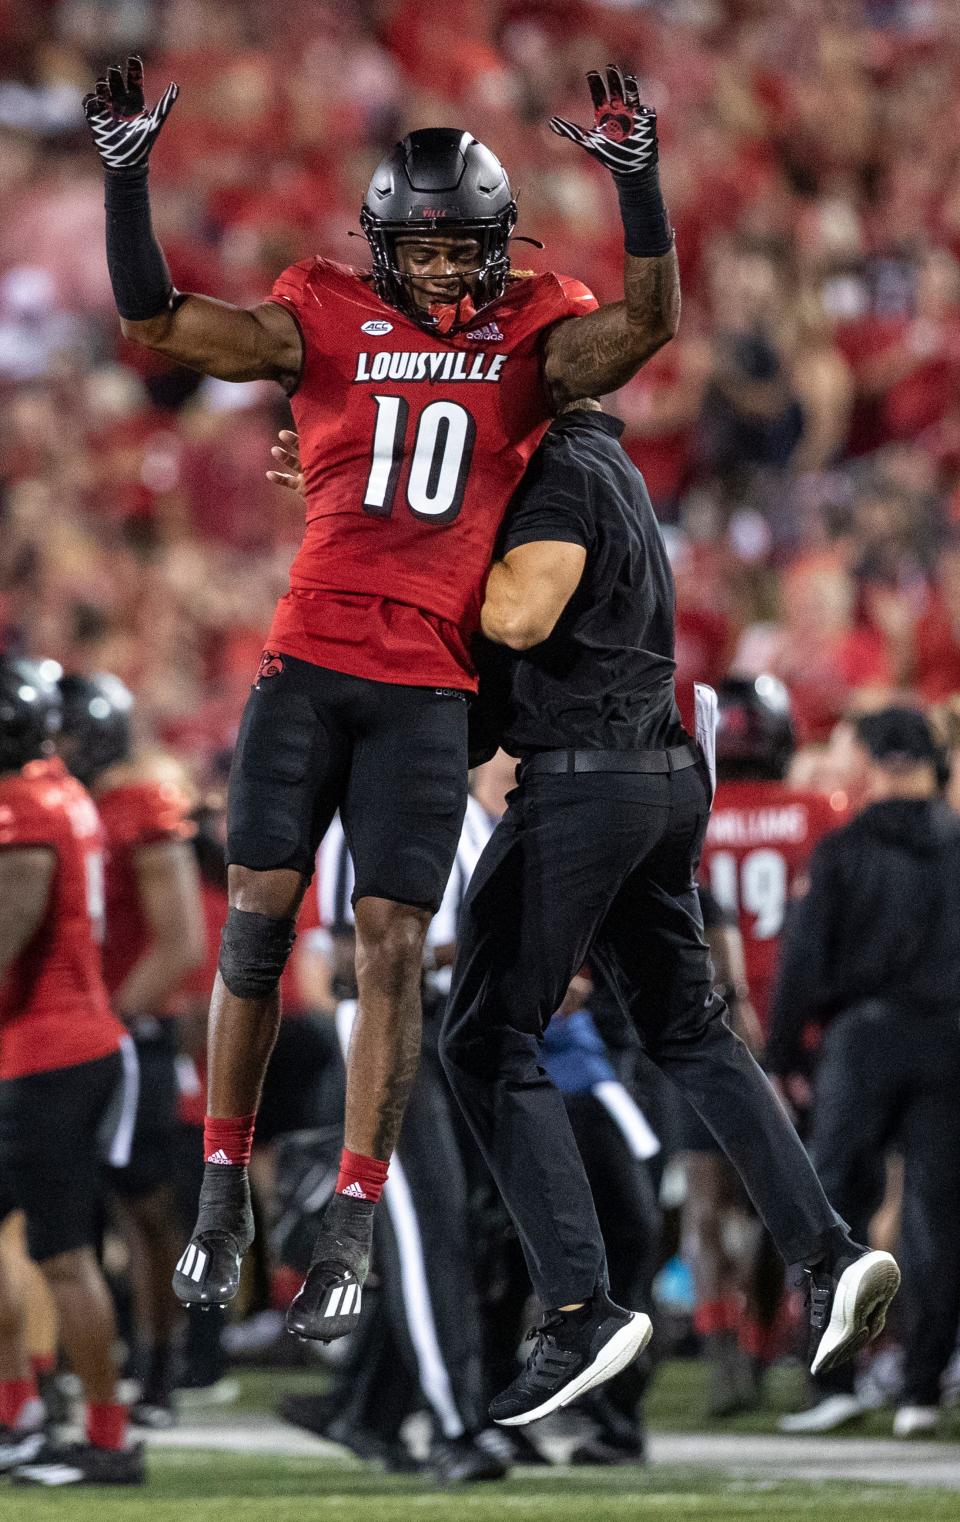 Louisville's Ben Perry celebrates with a coach after a stop against Florida State in September 2022. Perry is set to play a key role for the Cardinals this season.